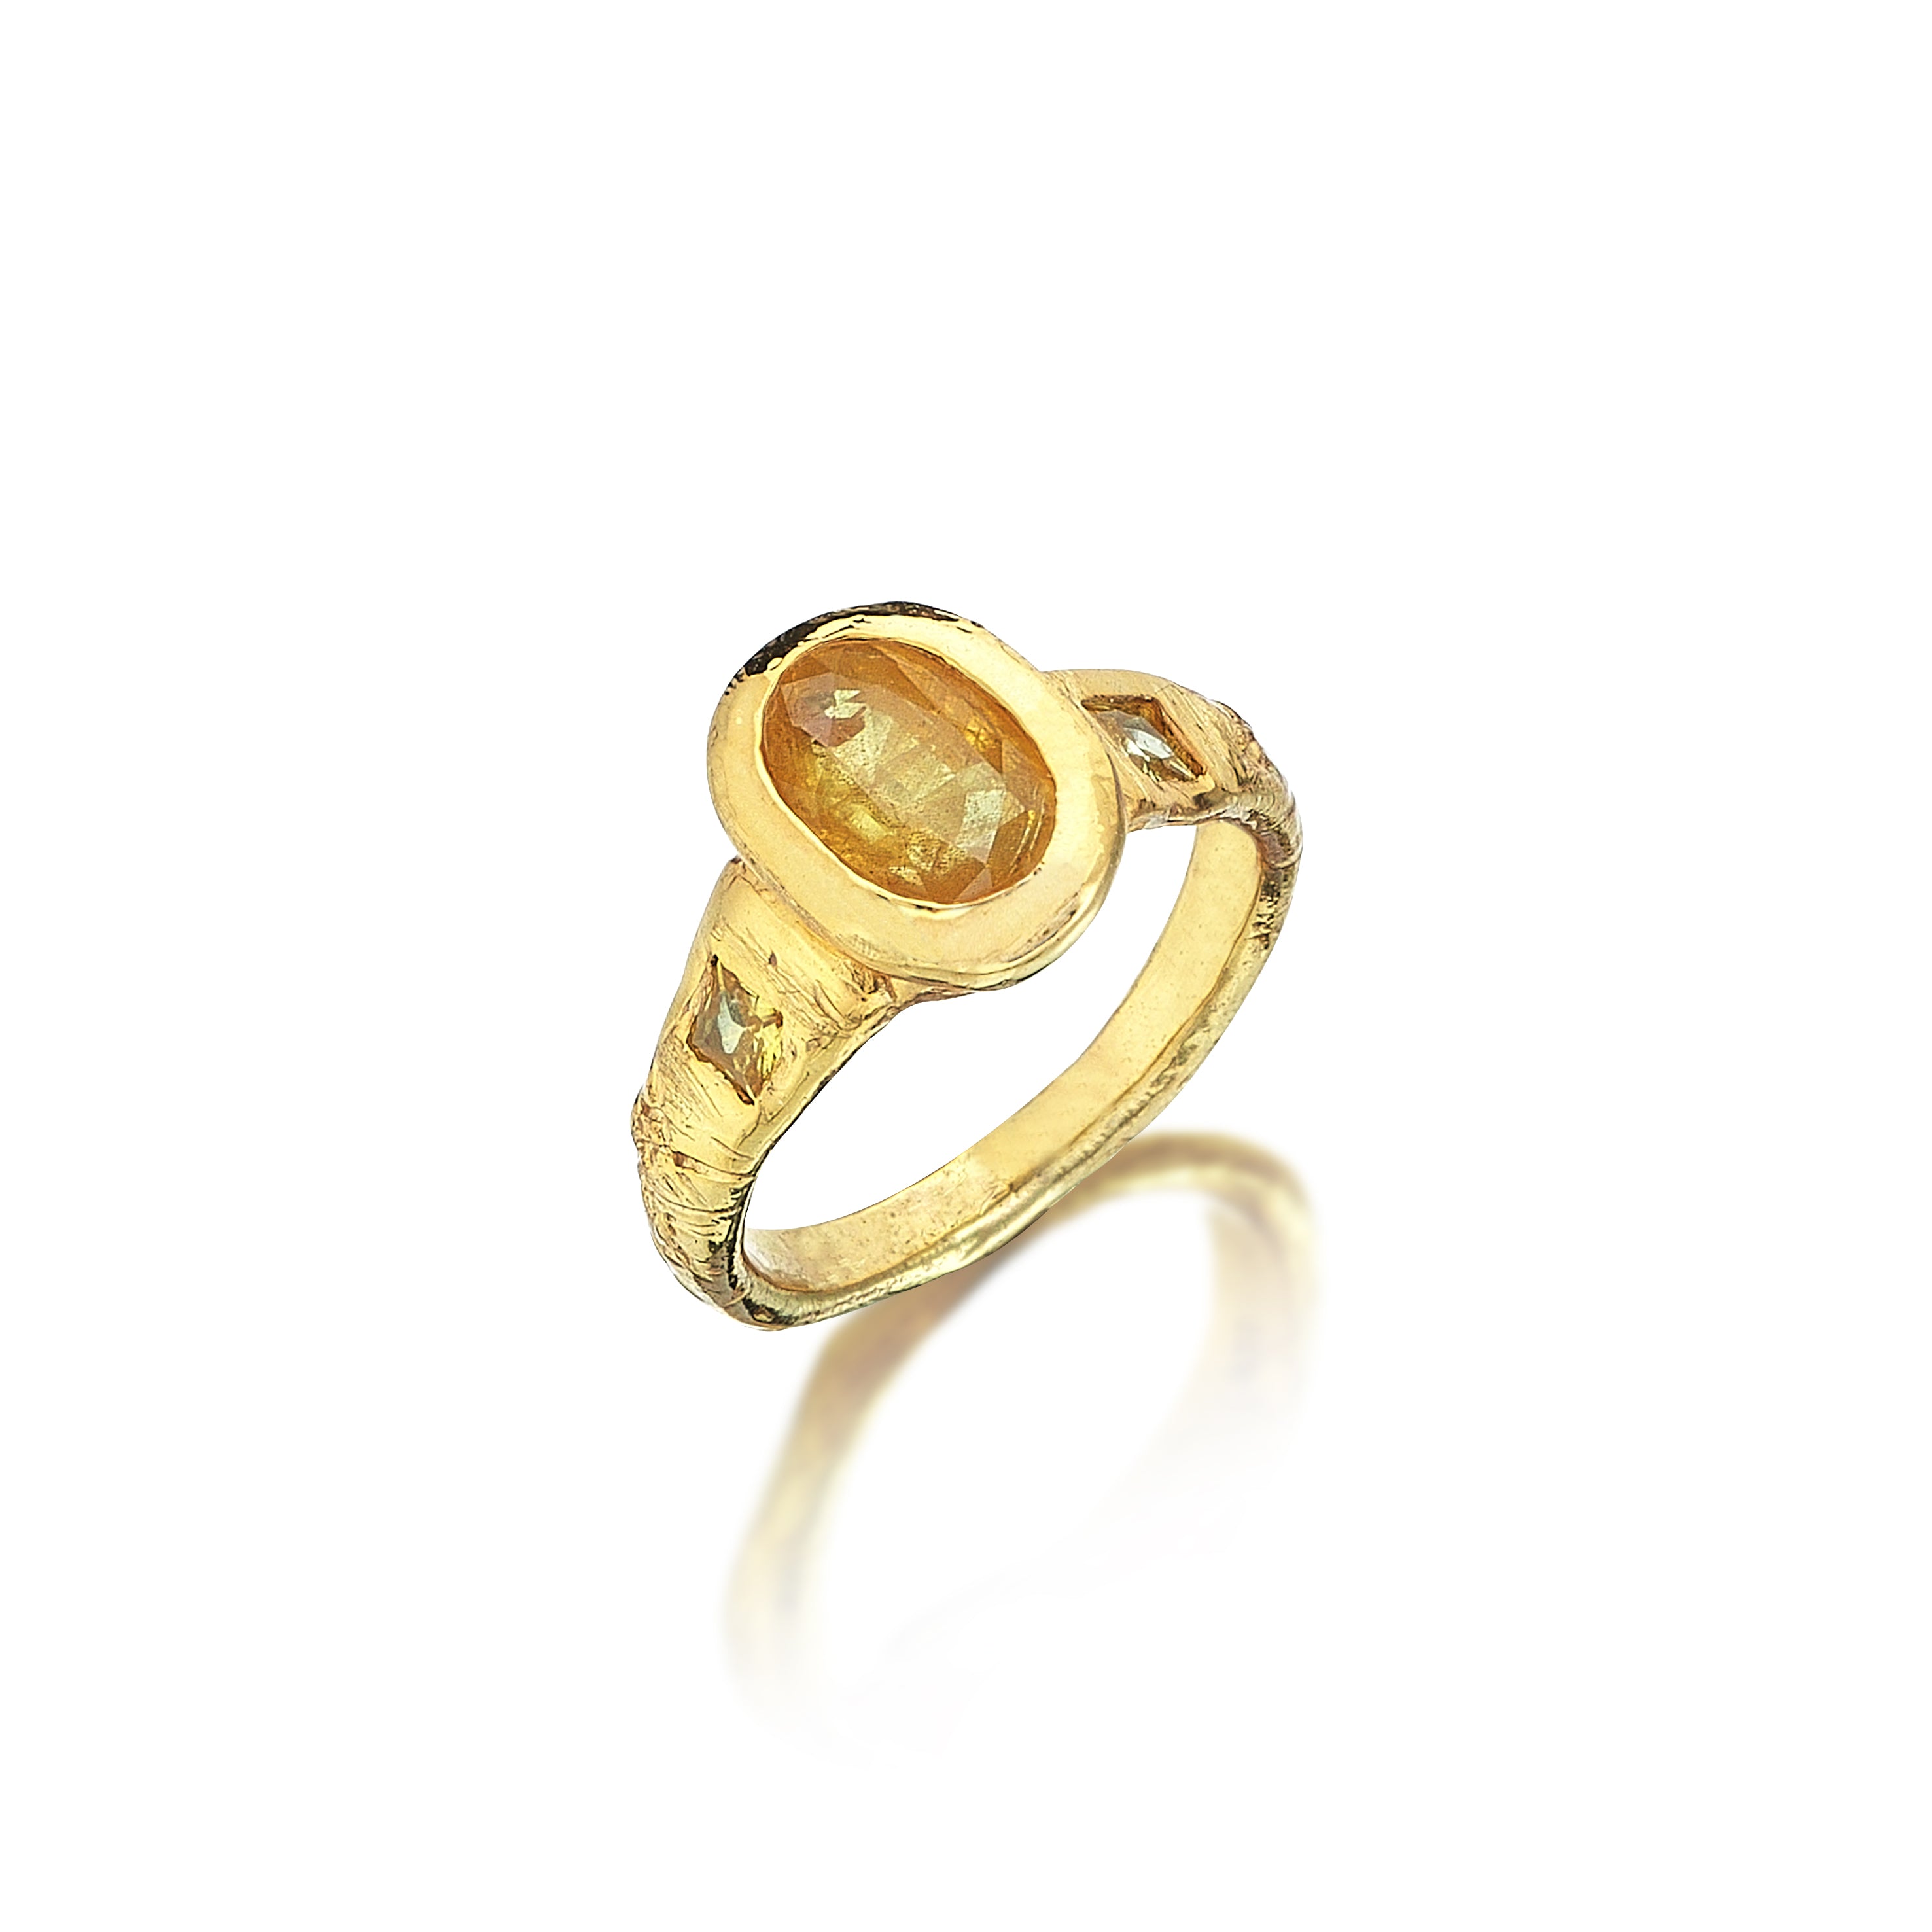 The Yellow Sapphire Ring